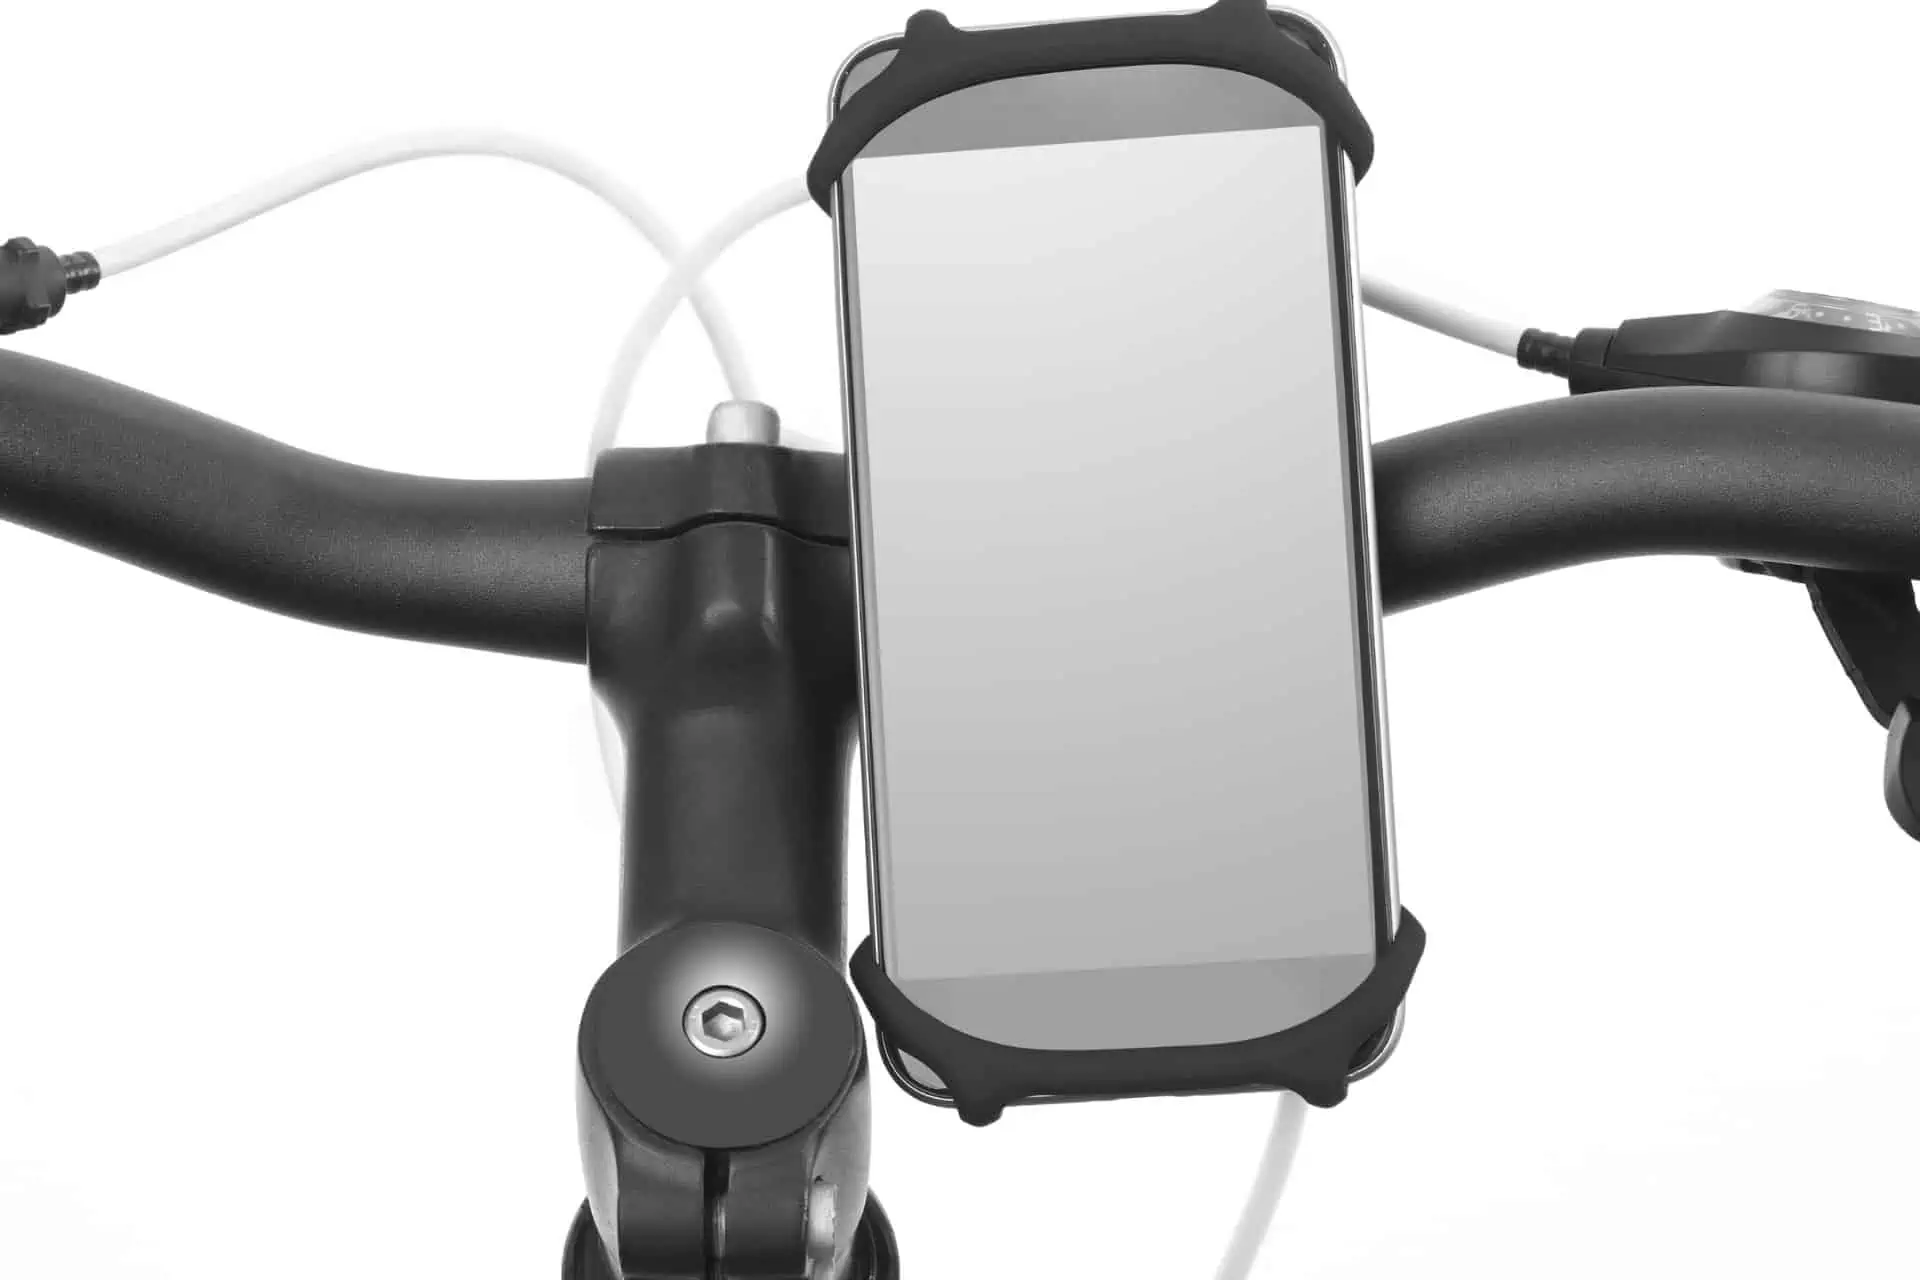 There are many different types of bike phone mounts to choose from. 